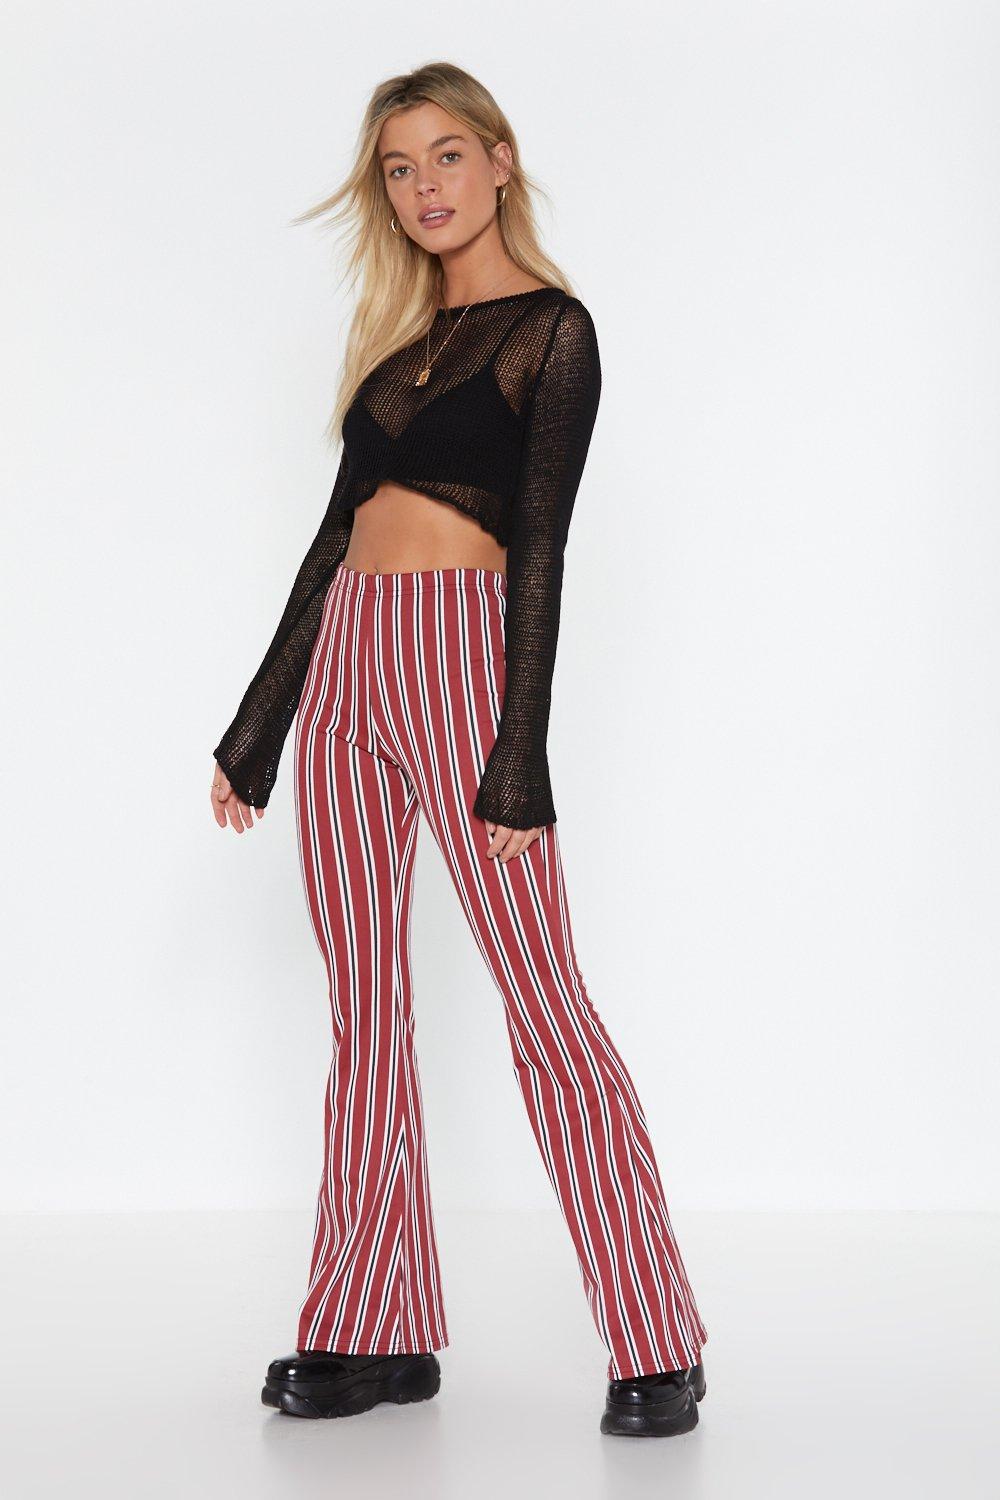 flare pants striped